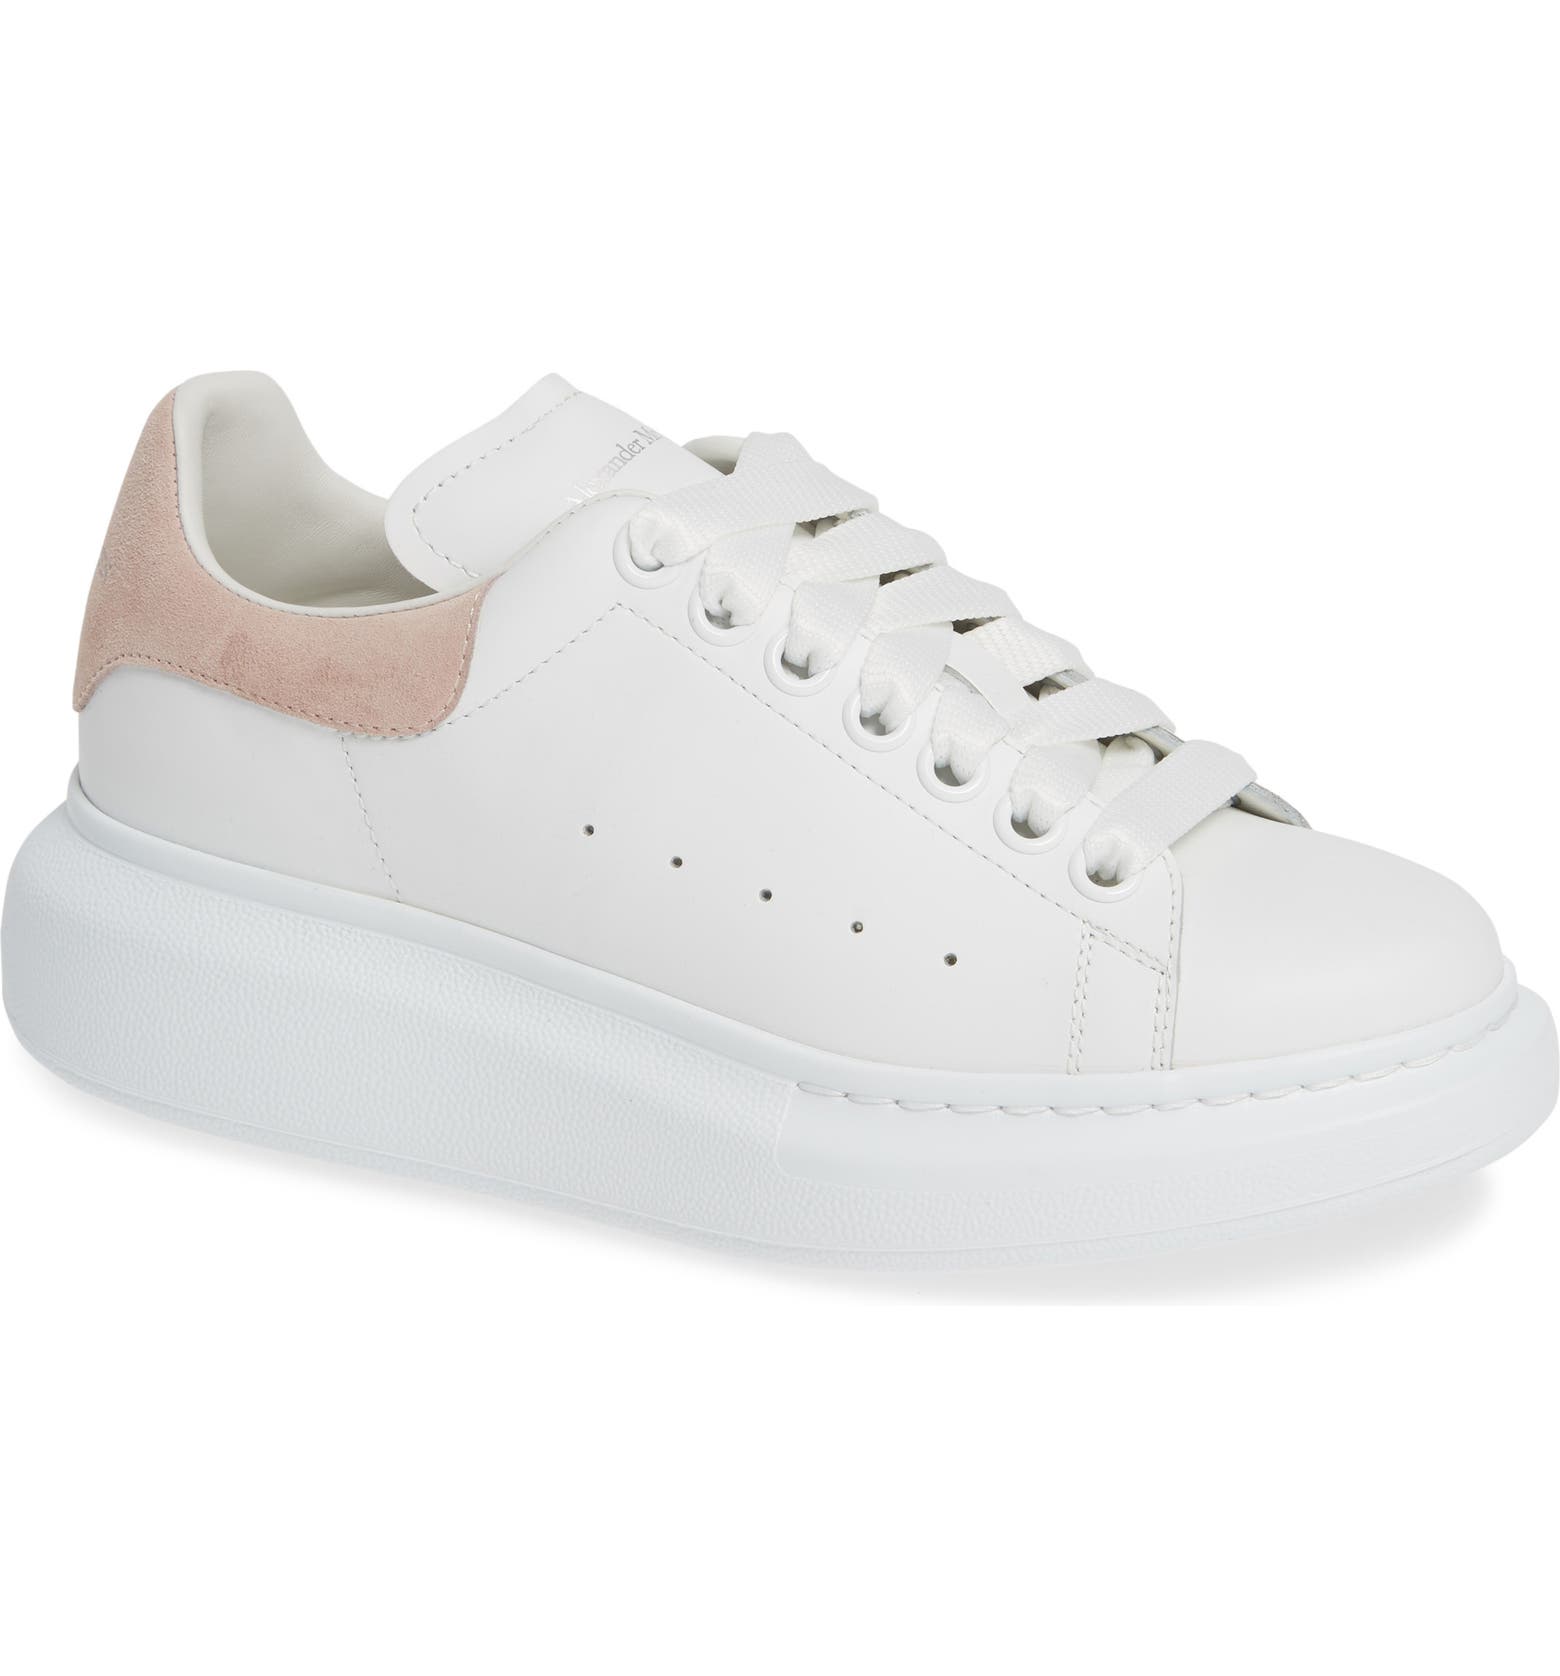 What Color Shoes Go With Everything: White sneakers